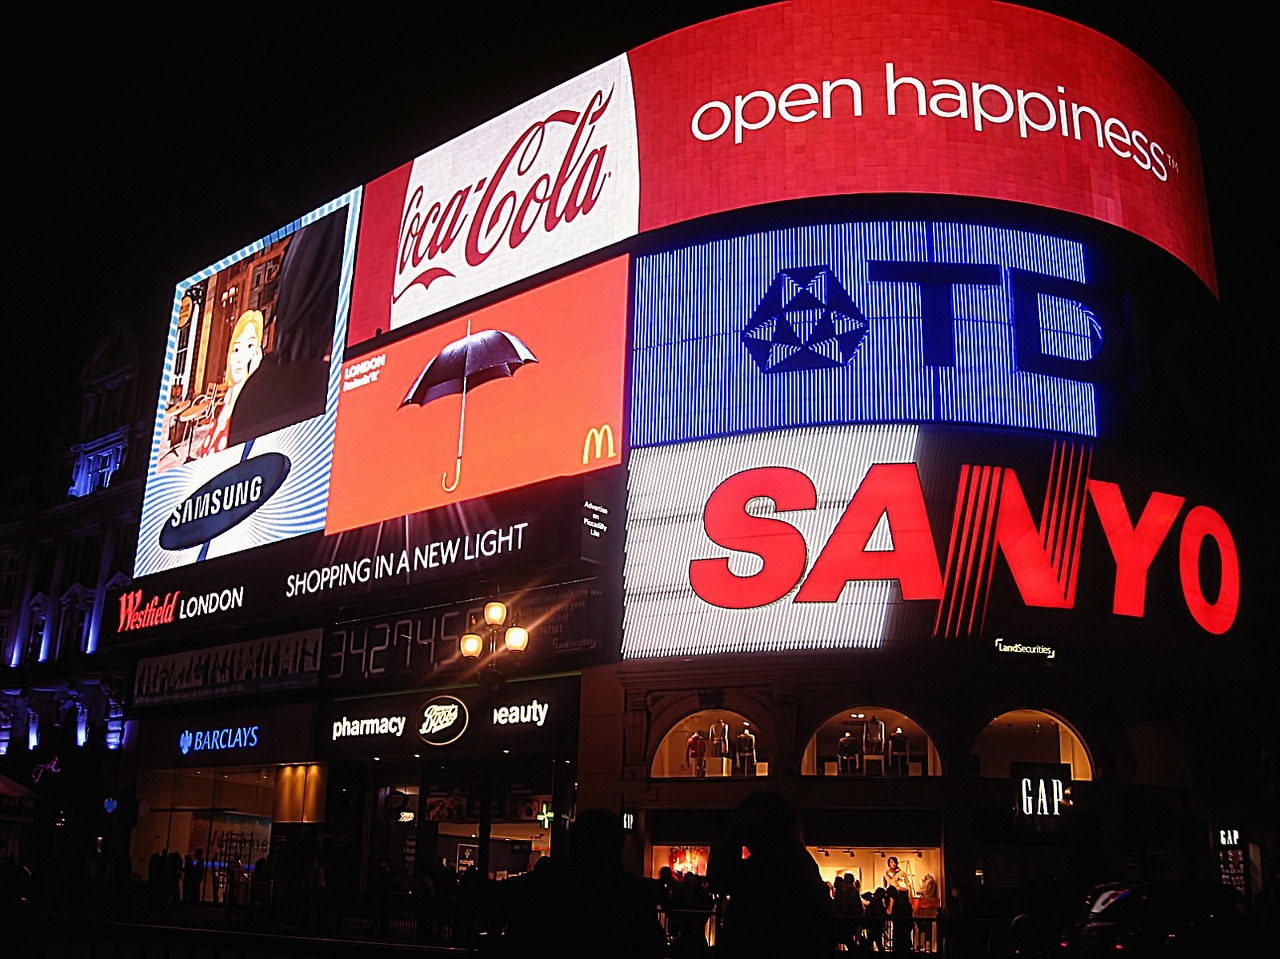 This is an image of digital billboards in London, England.